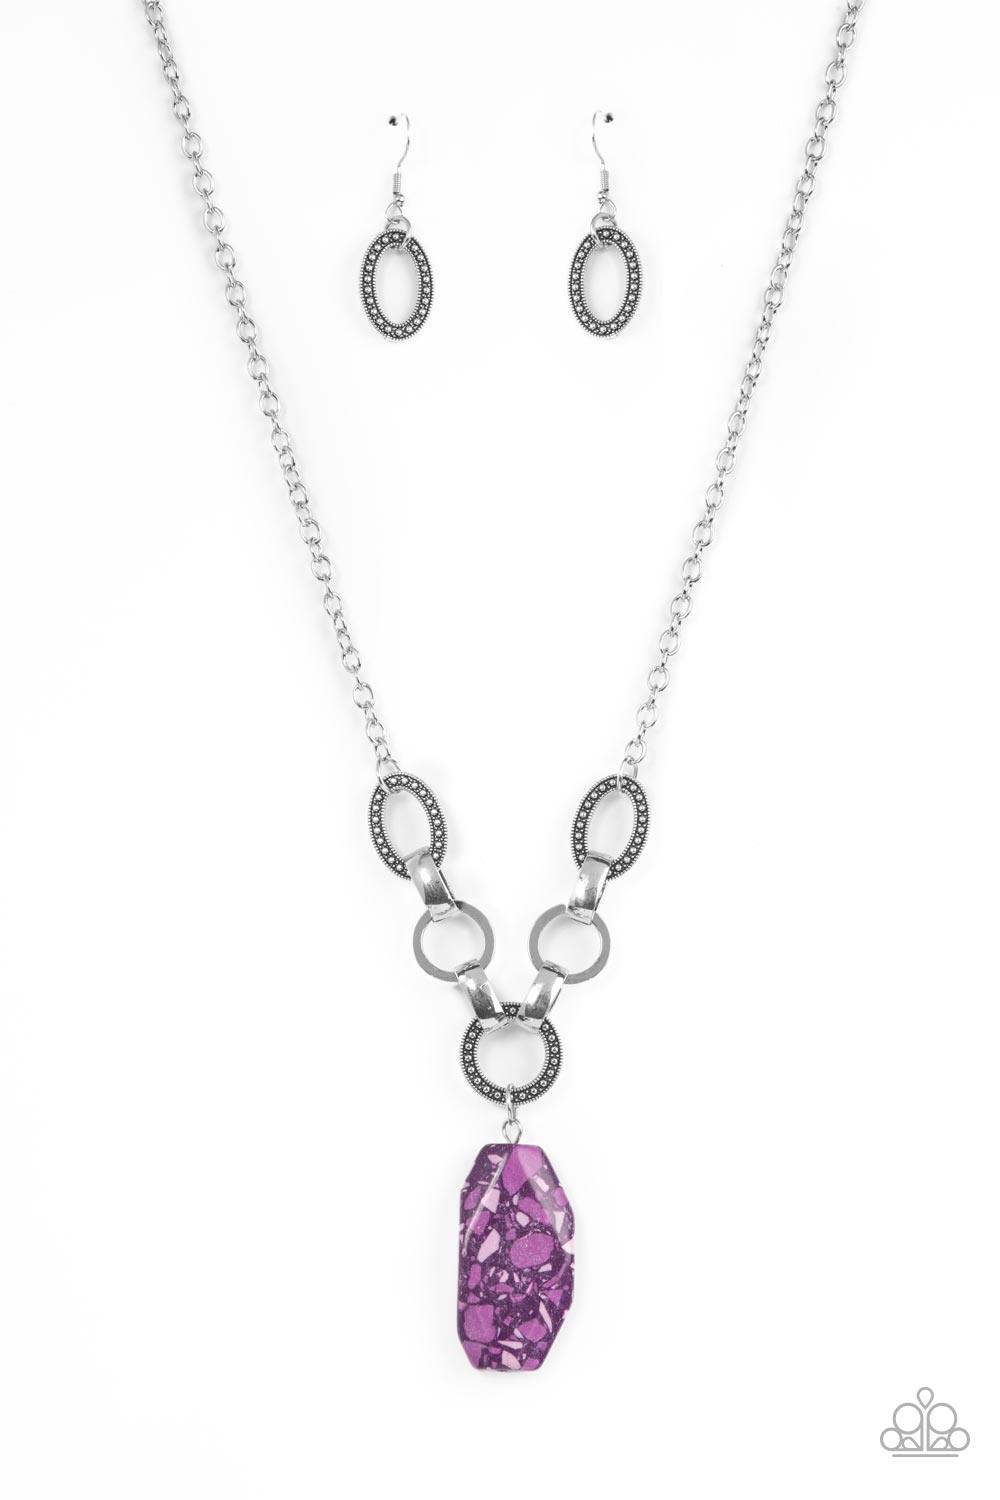 Featuring a colorful multicolored terrazzo finish, a faceted purple faux stone swings from a row of studded silver rings, flat silver hoops, and oversized silver fittings, creating an earthy pendant below the collar. Features an adjustable clasp closure.